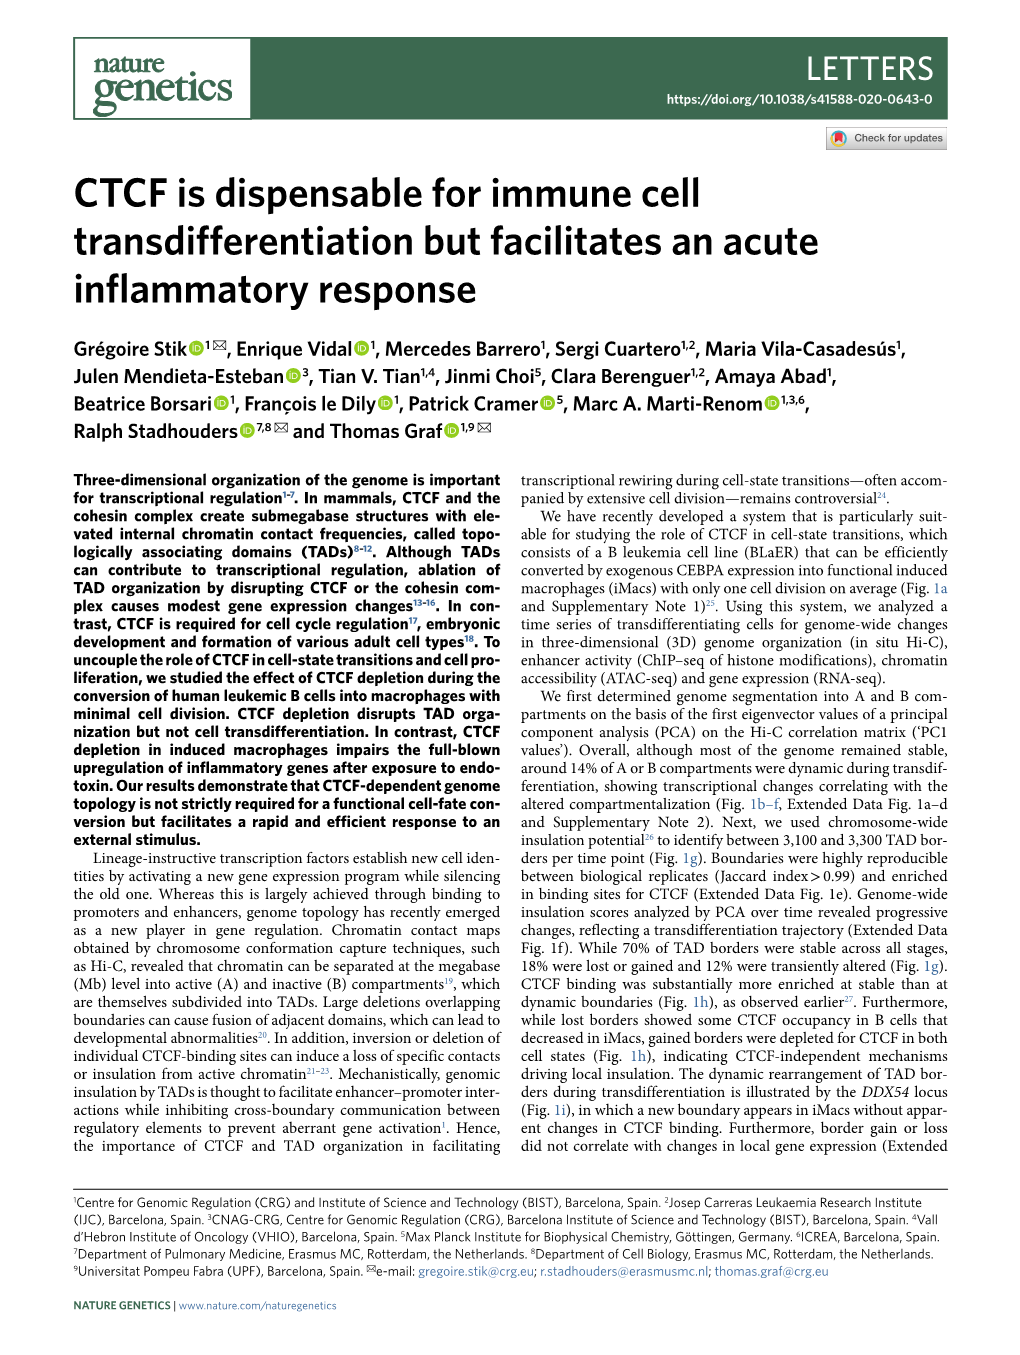 CTCF Is Dispensable for Immune Cell Transdifferentiation but Facilitates an Acute Inflammatory Response